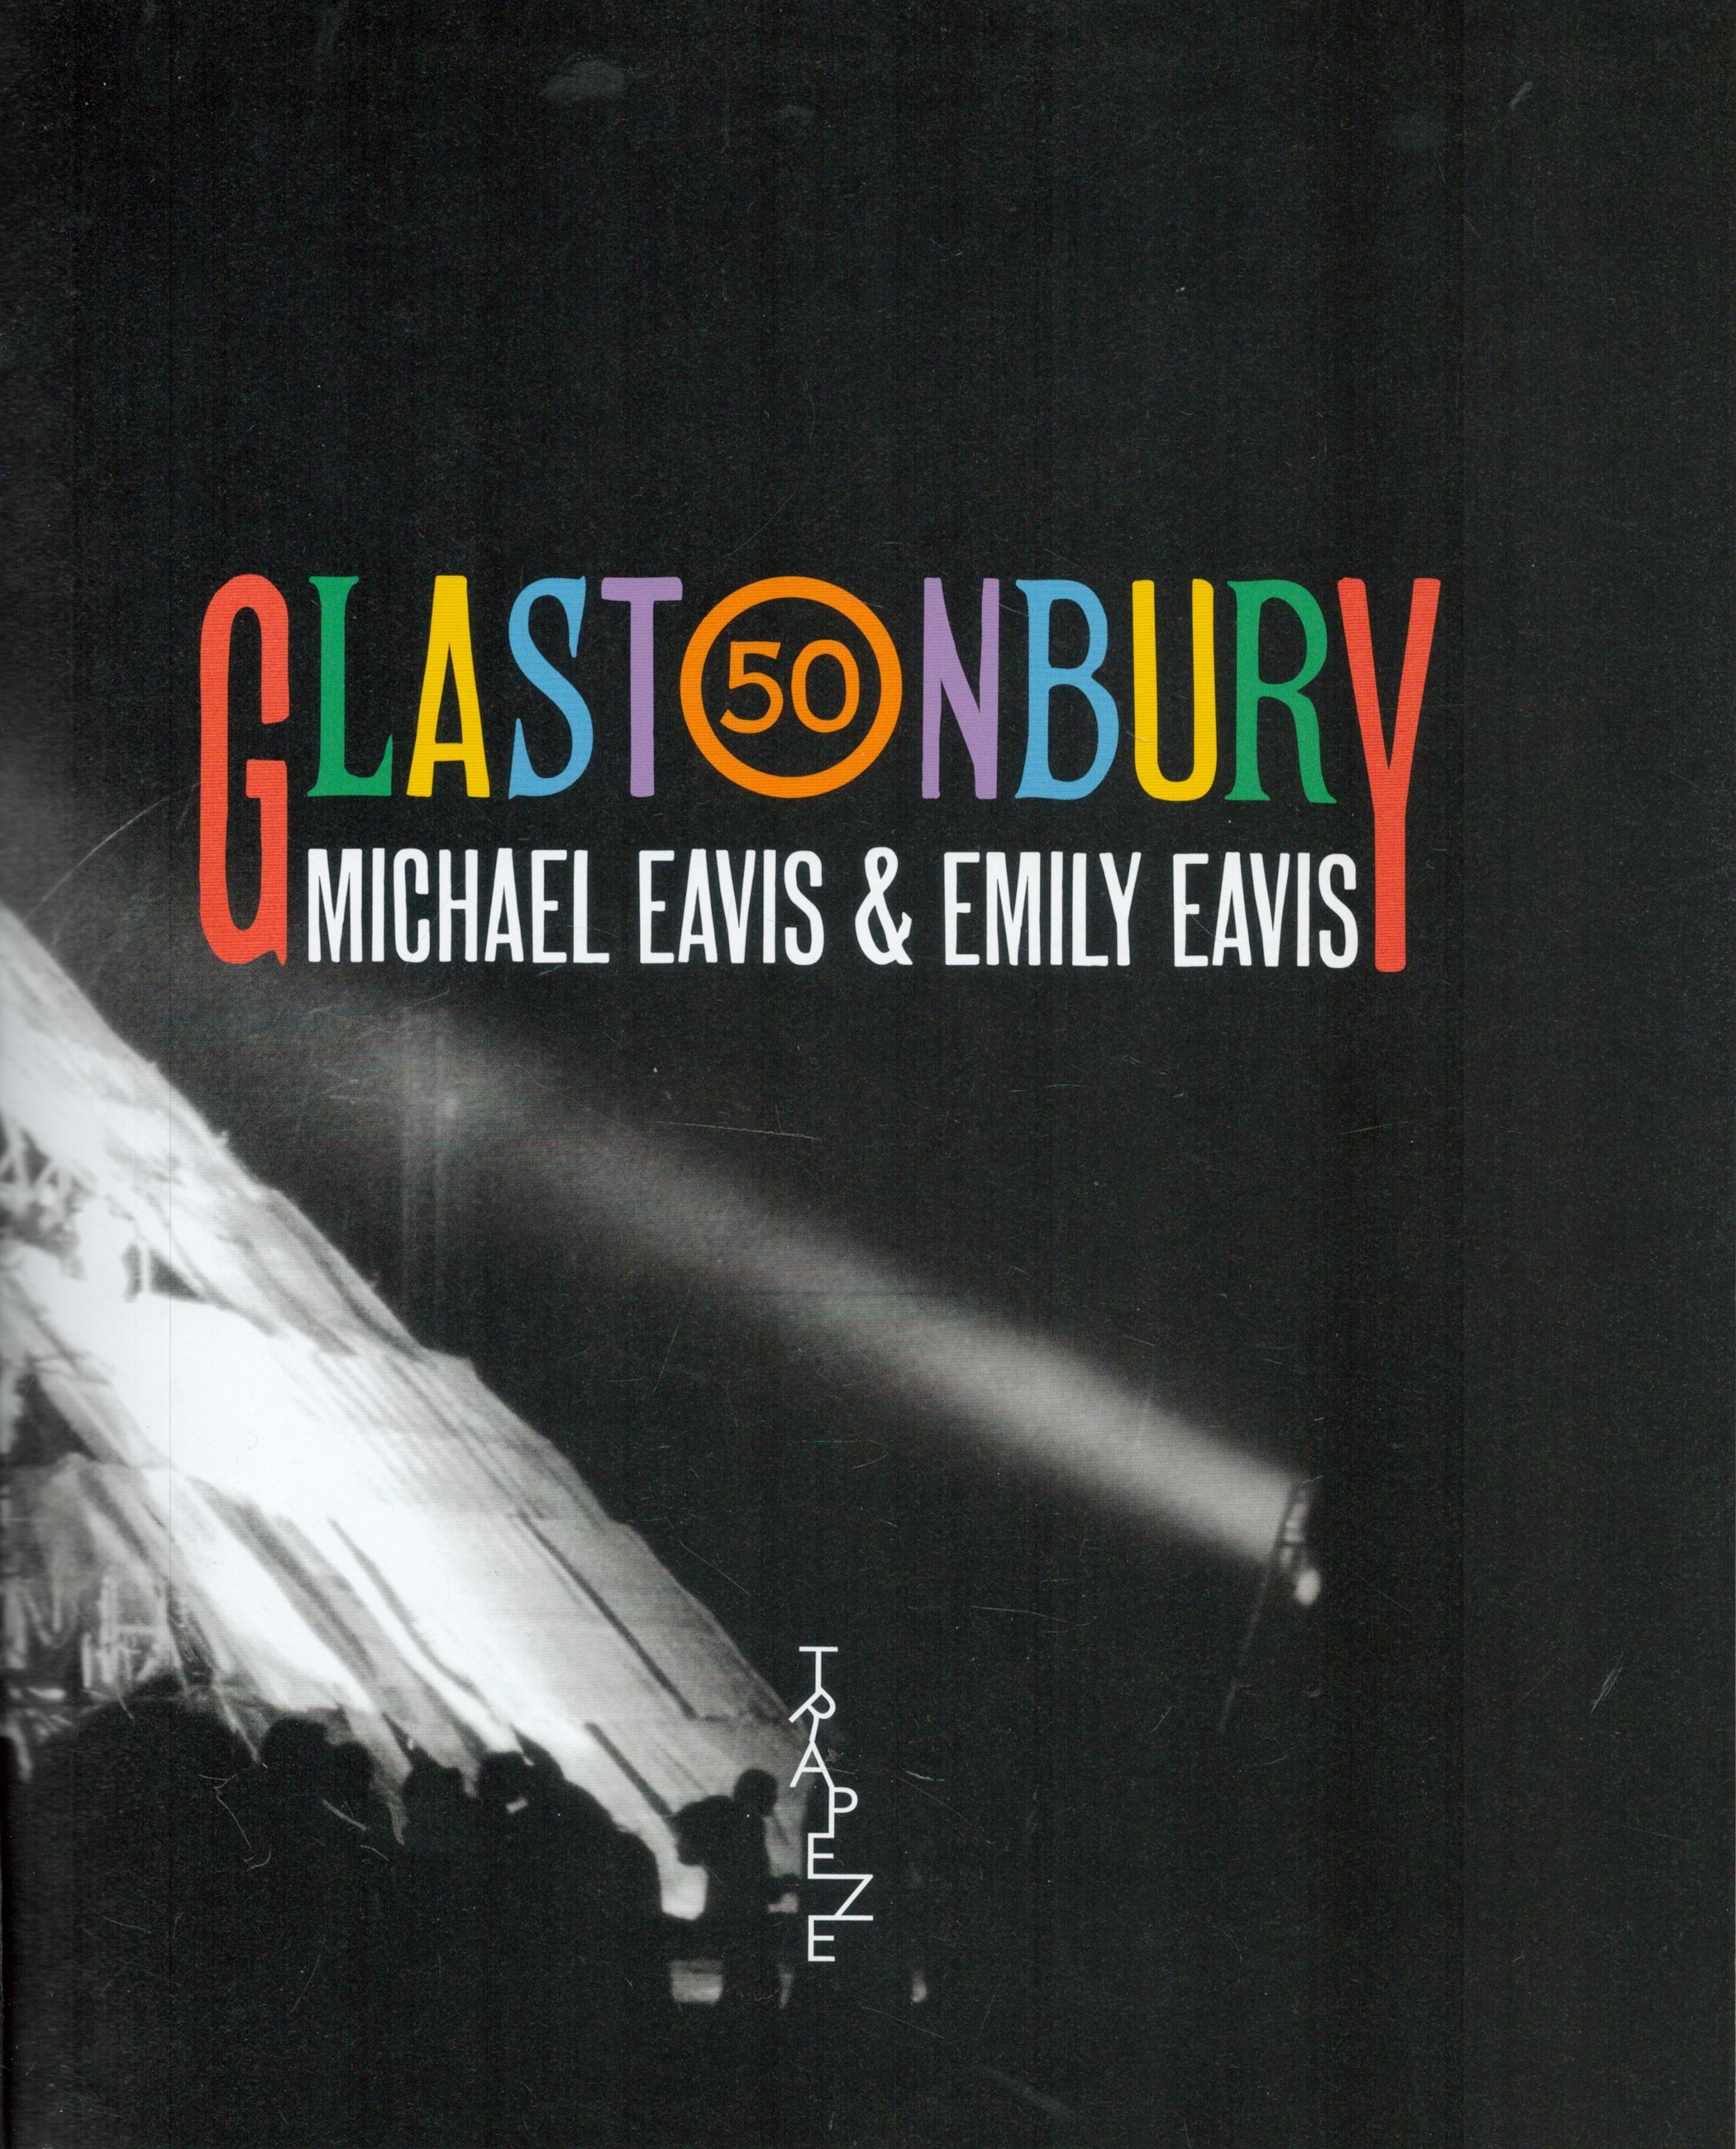 Glastonbury by Michael and Emily Eavis 2019 First Edition Hardback Book with 303 pages published - Image 2 of 3